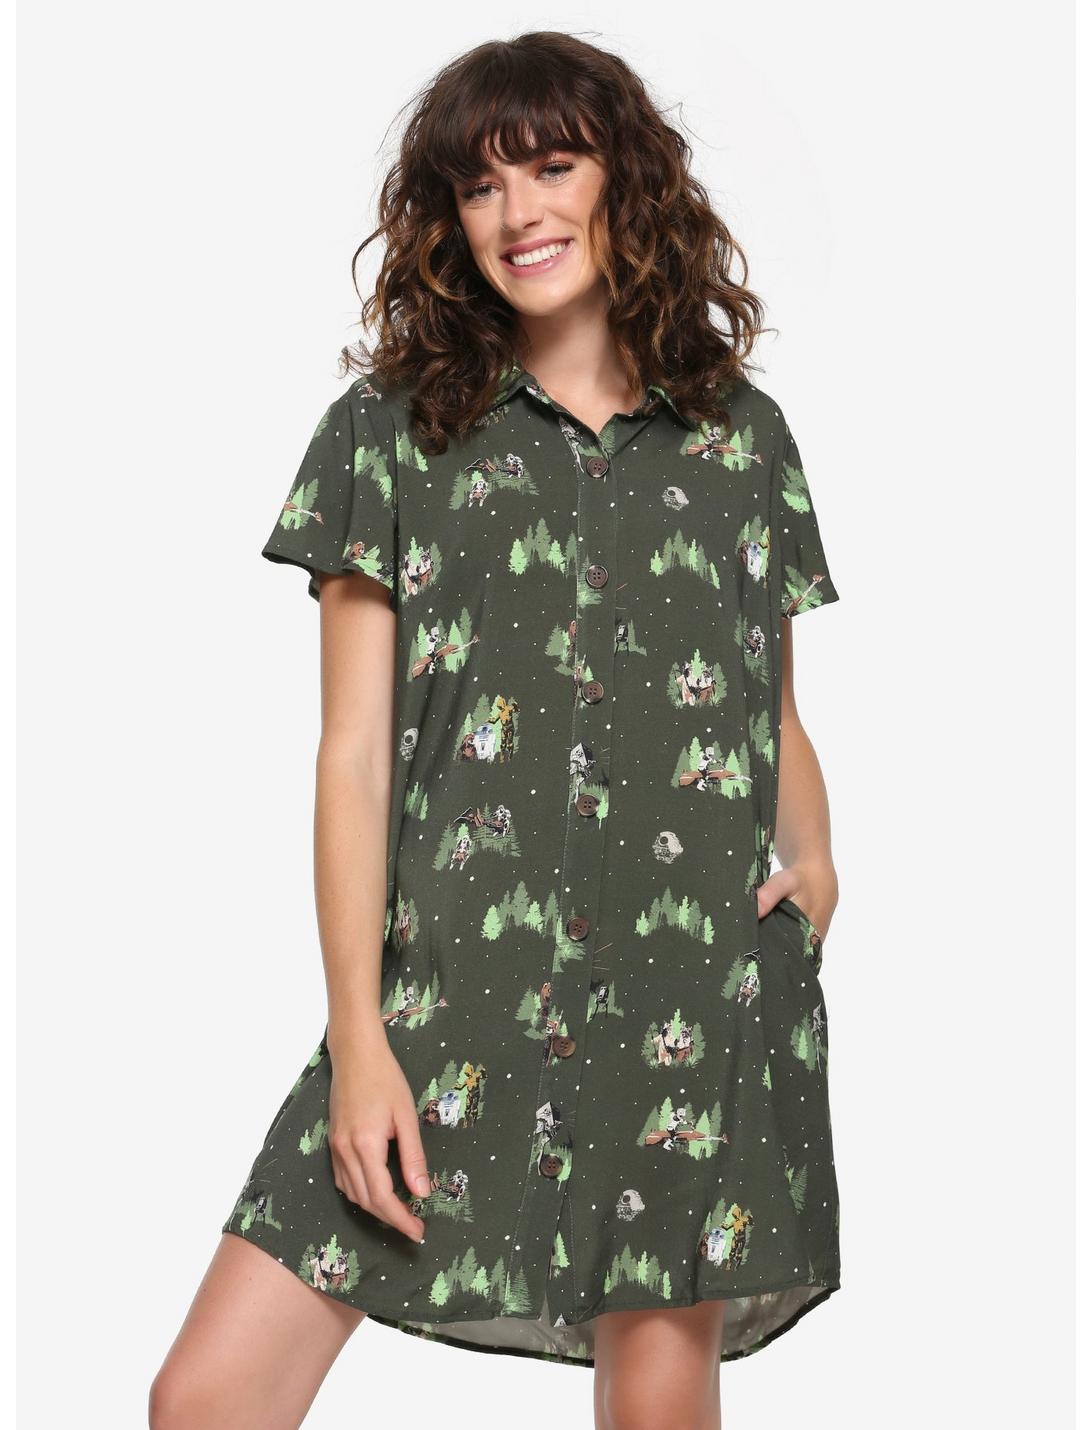 Our Universe Star Wars Endor Allover Print Women's Dress - BoxLunch Exclusive, GREEN, hi-res